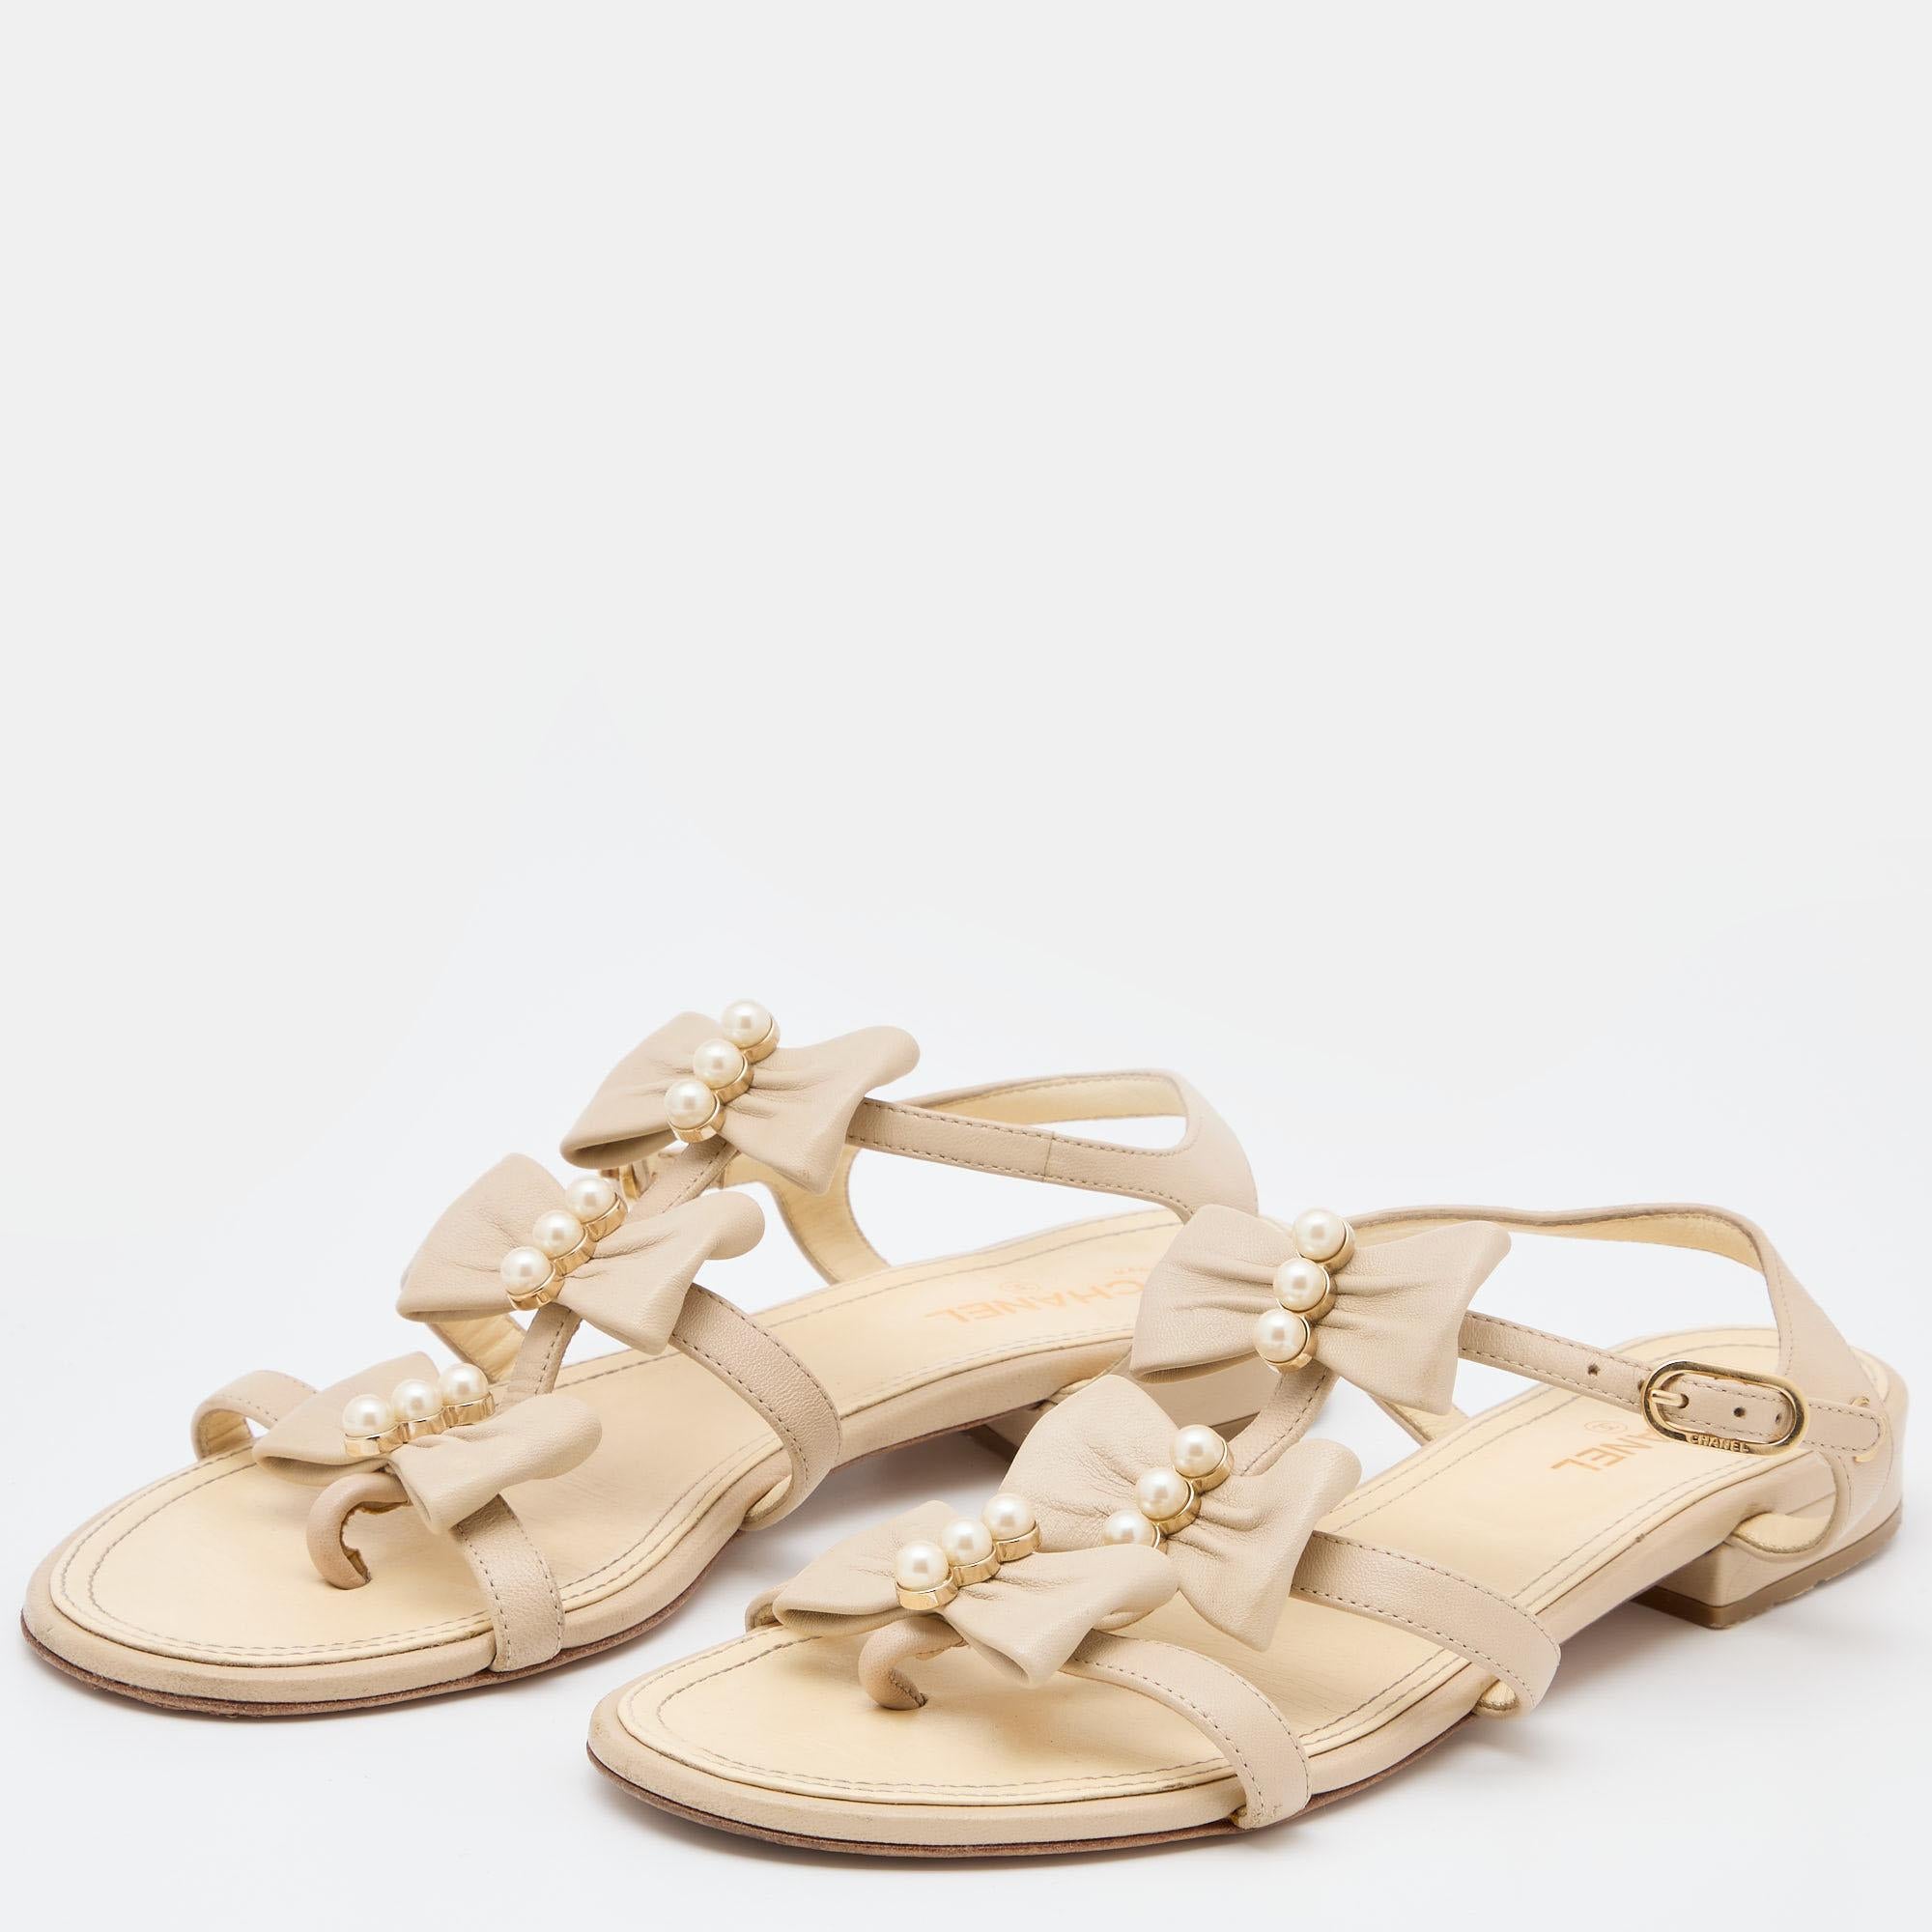 These Chanel sandals are crafted from quality leather for your comfort. Flaunt this fabulous cream pair as you step out in style. It features a strappy design with pearl-embellished bow details. The sandals are complete with buckled ankle straps and